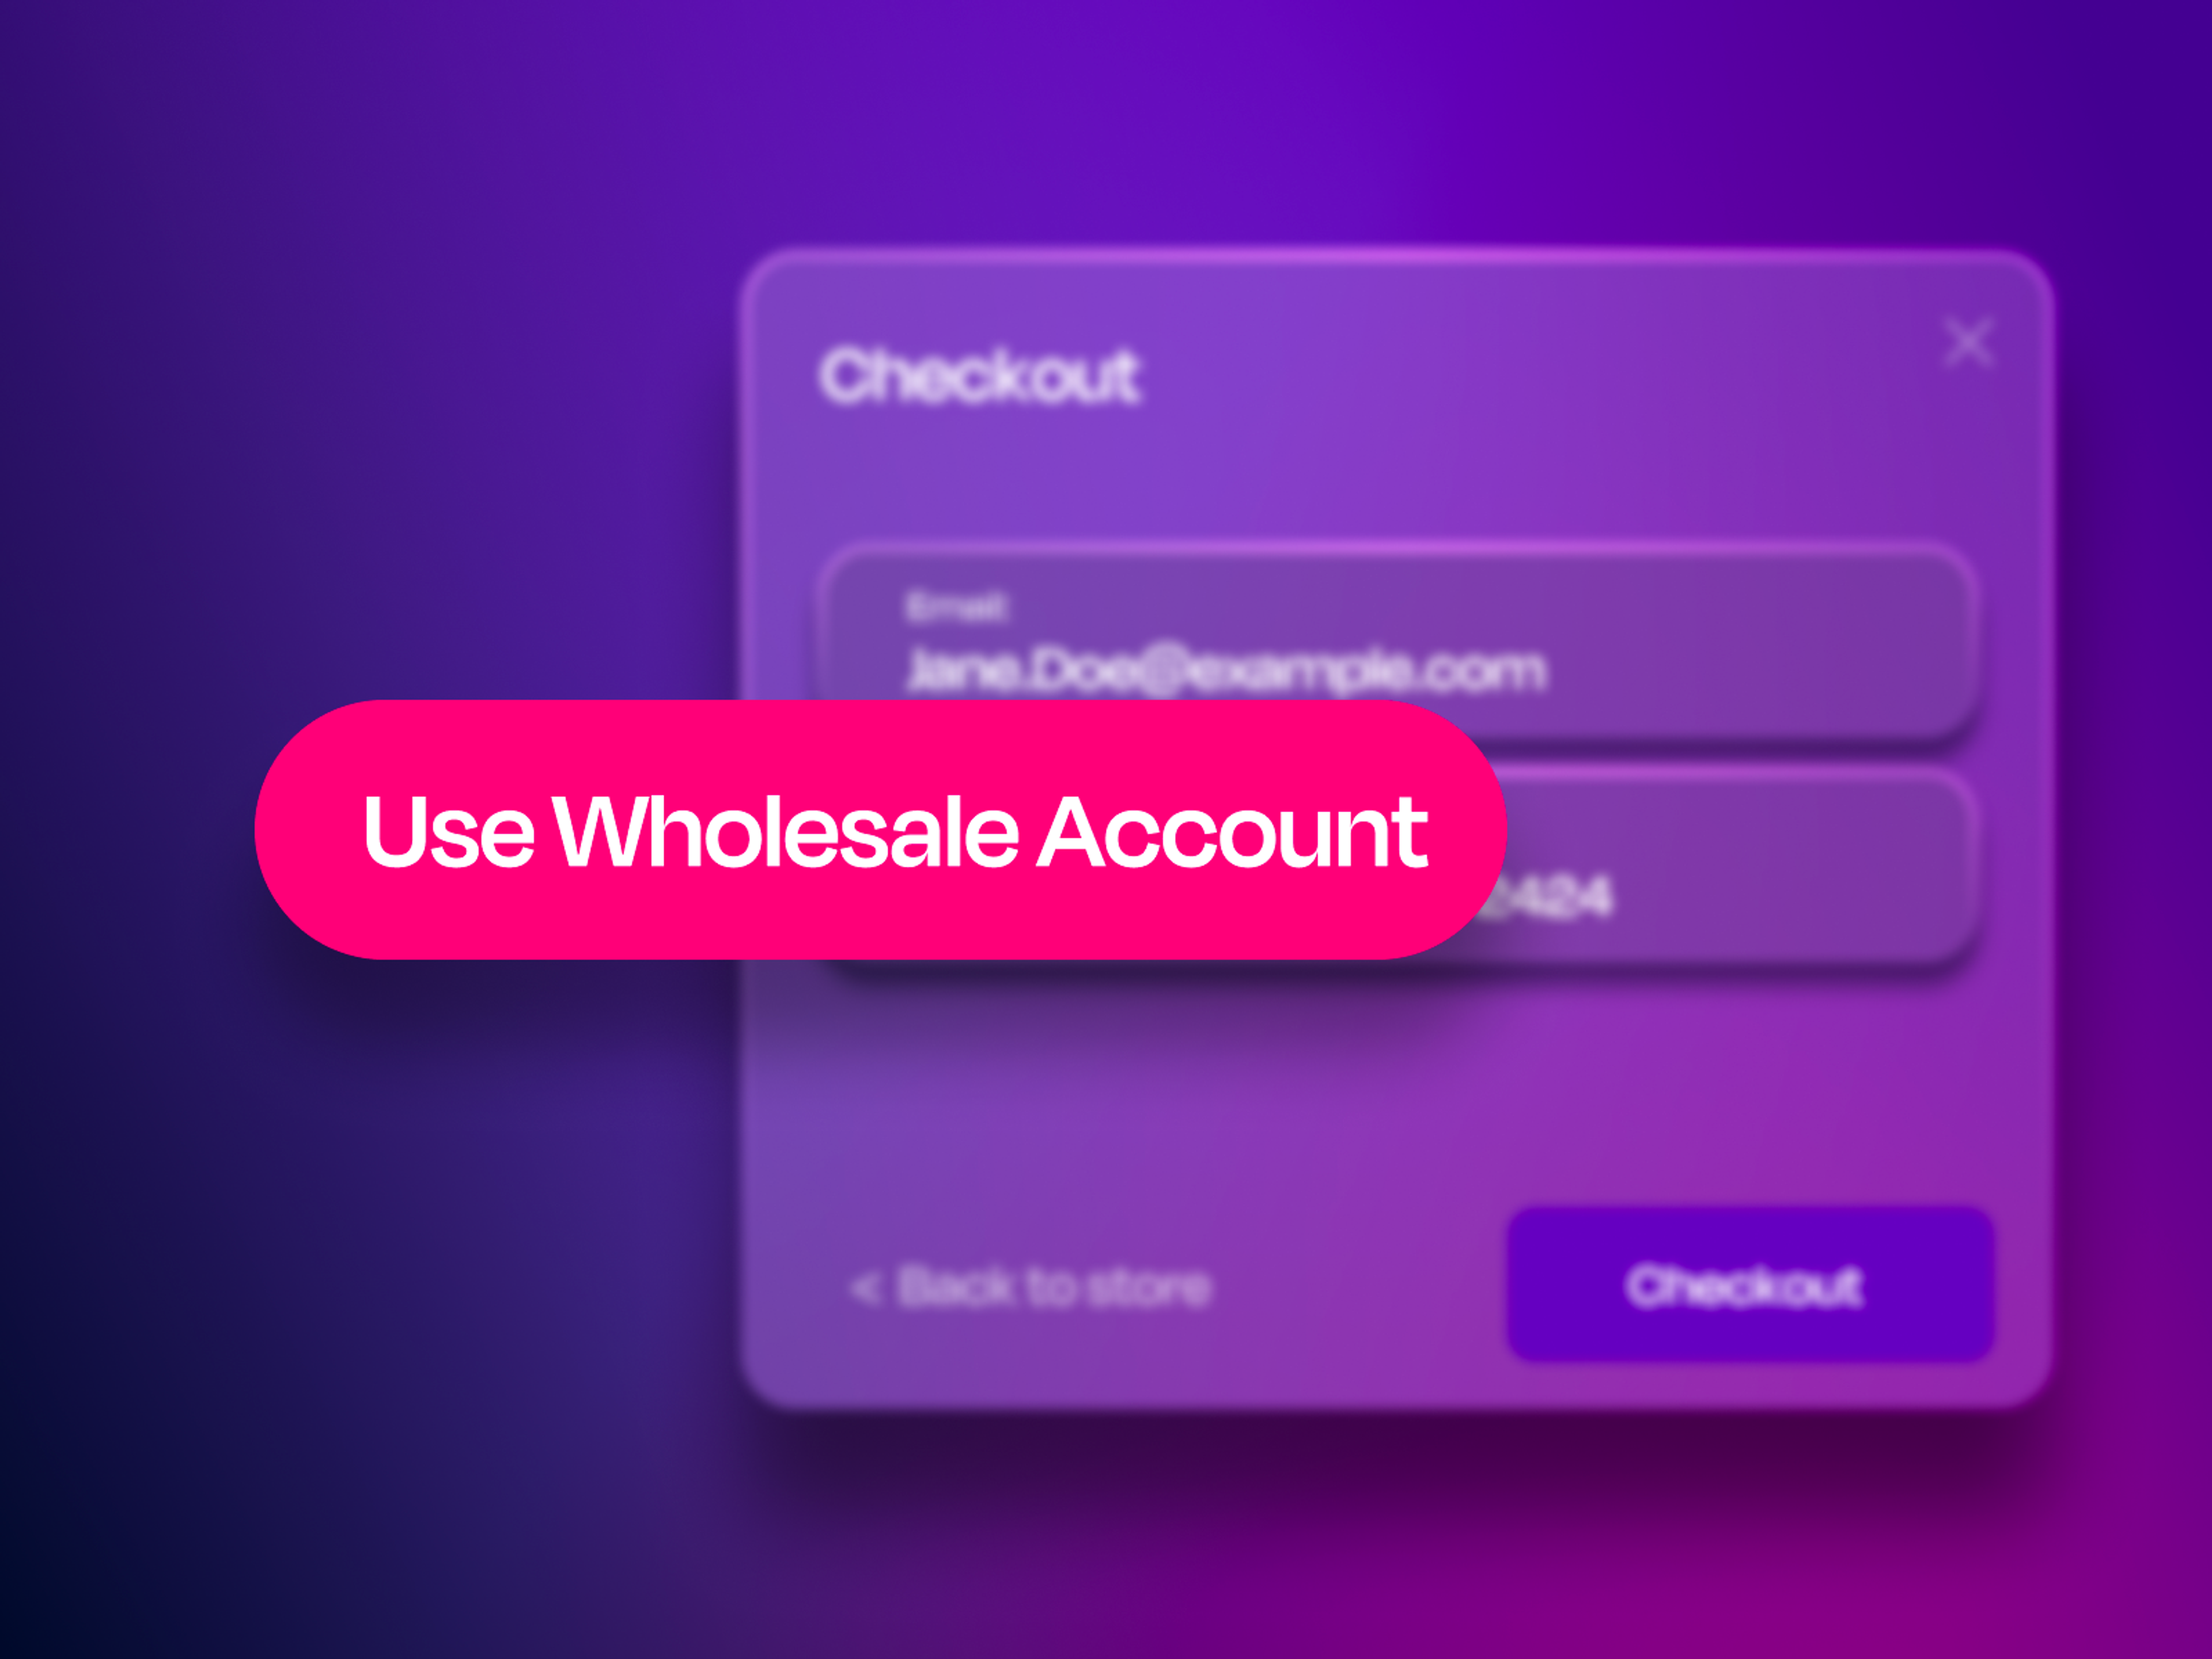 Sign in to a wholesale account to get wholesale pricing and payment options in Bold Checkout